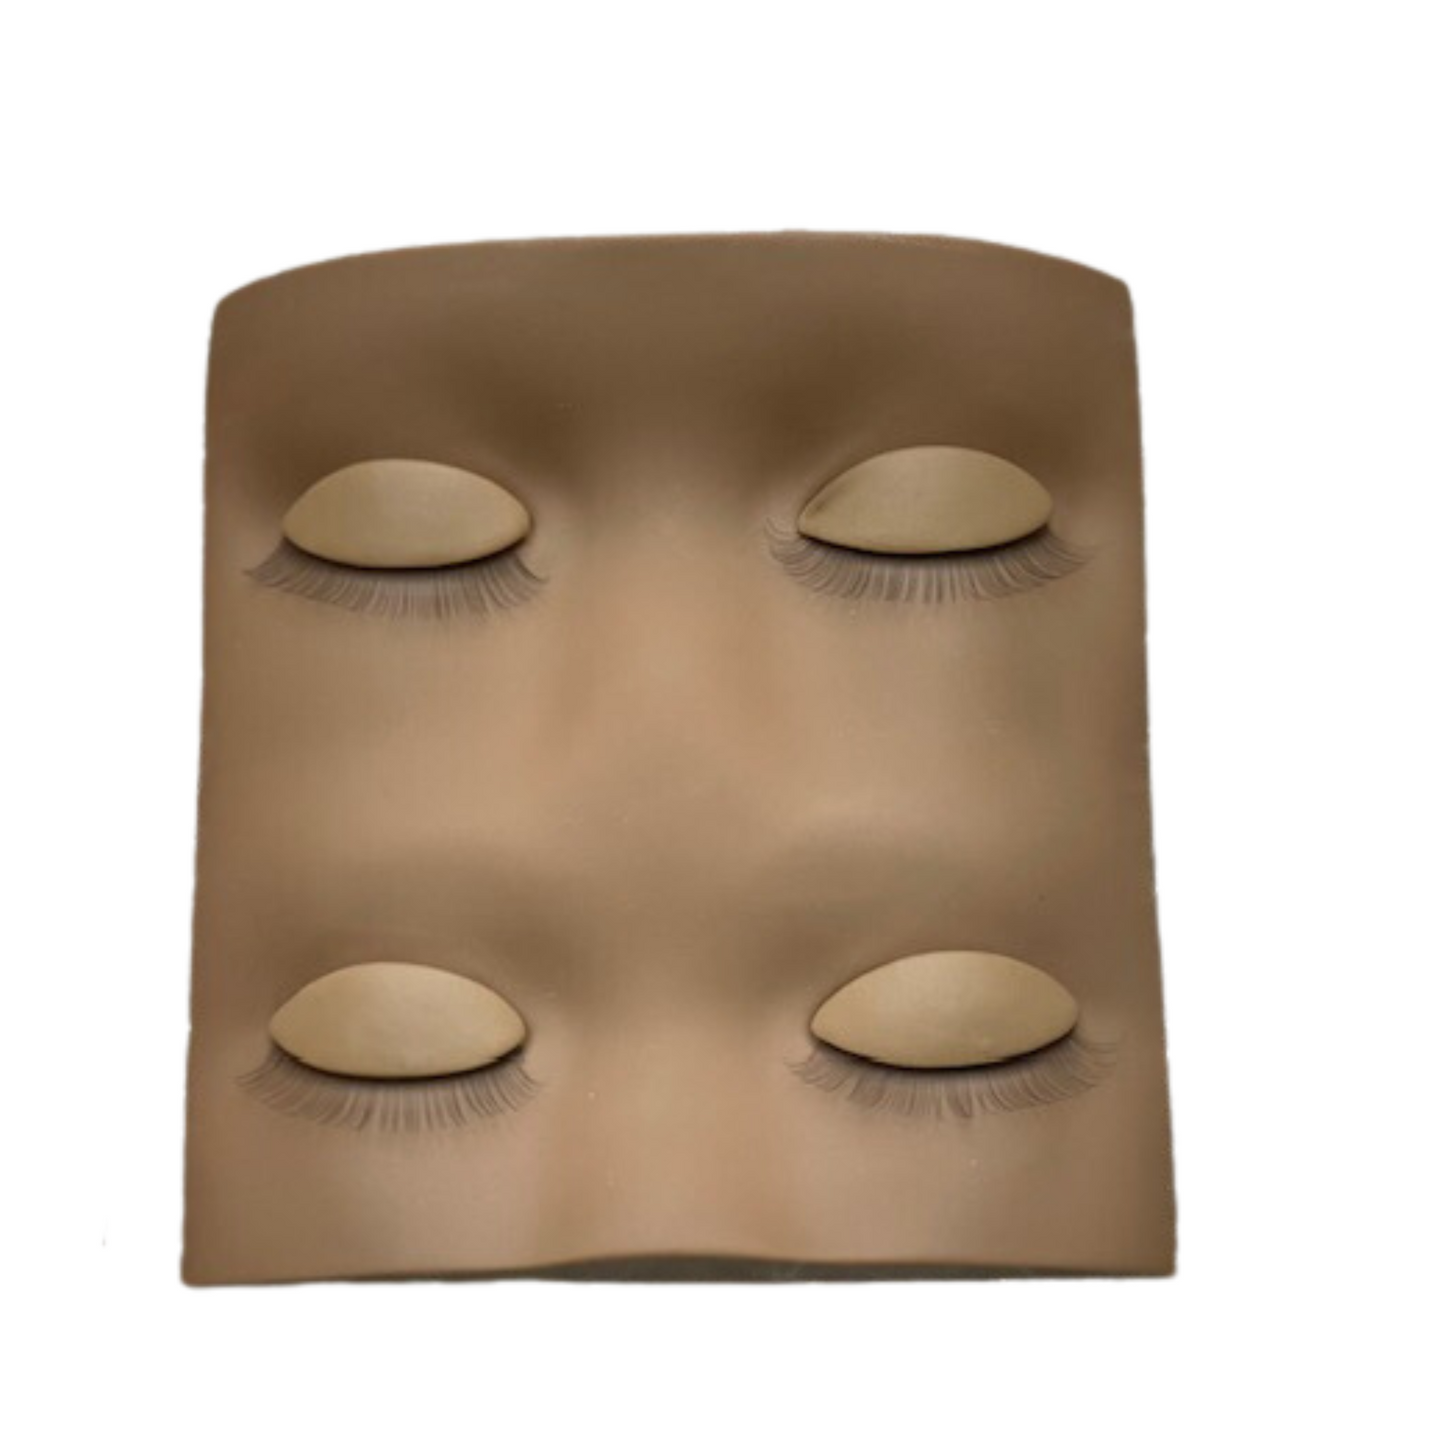 Flat Realistic Mannequin Face